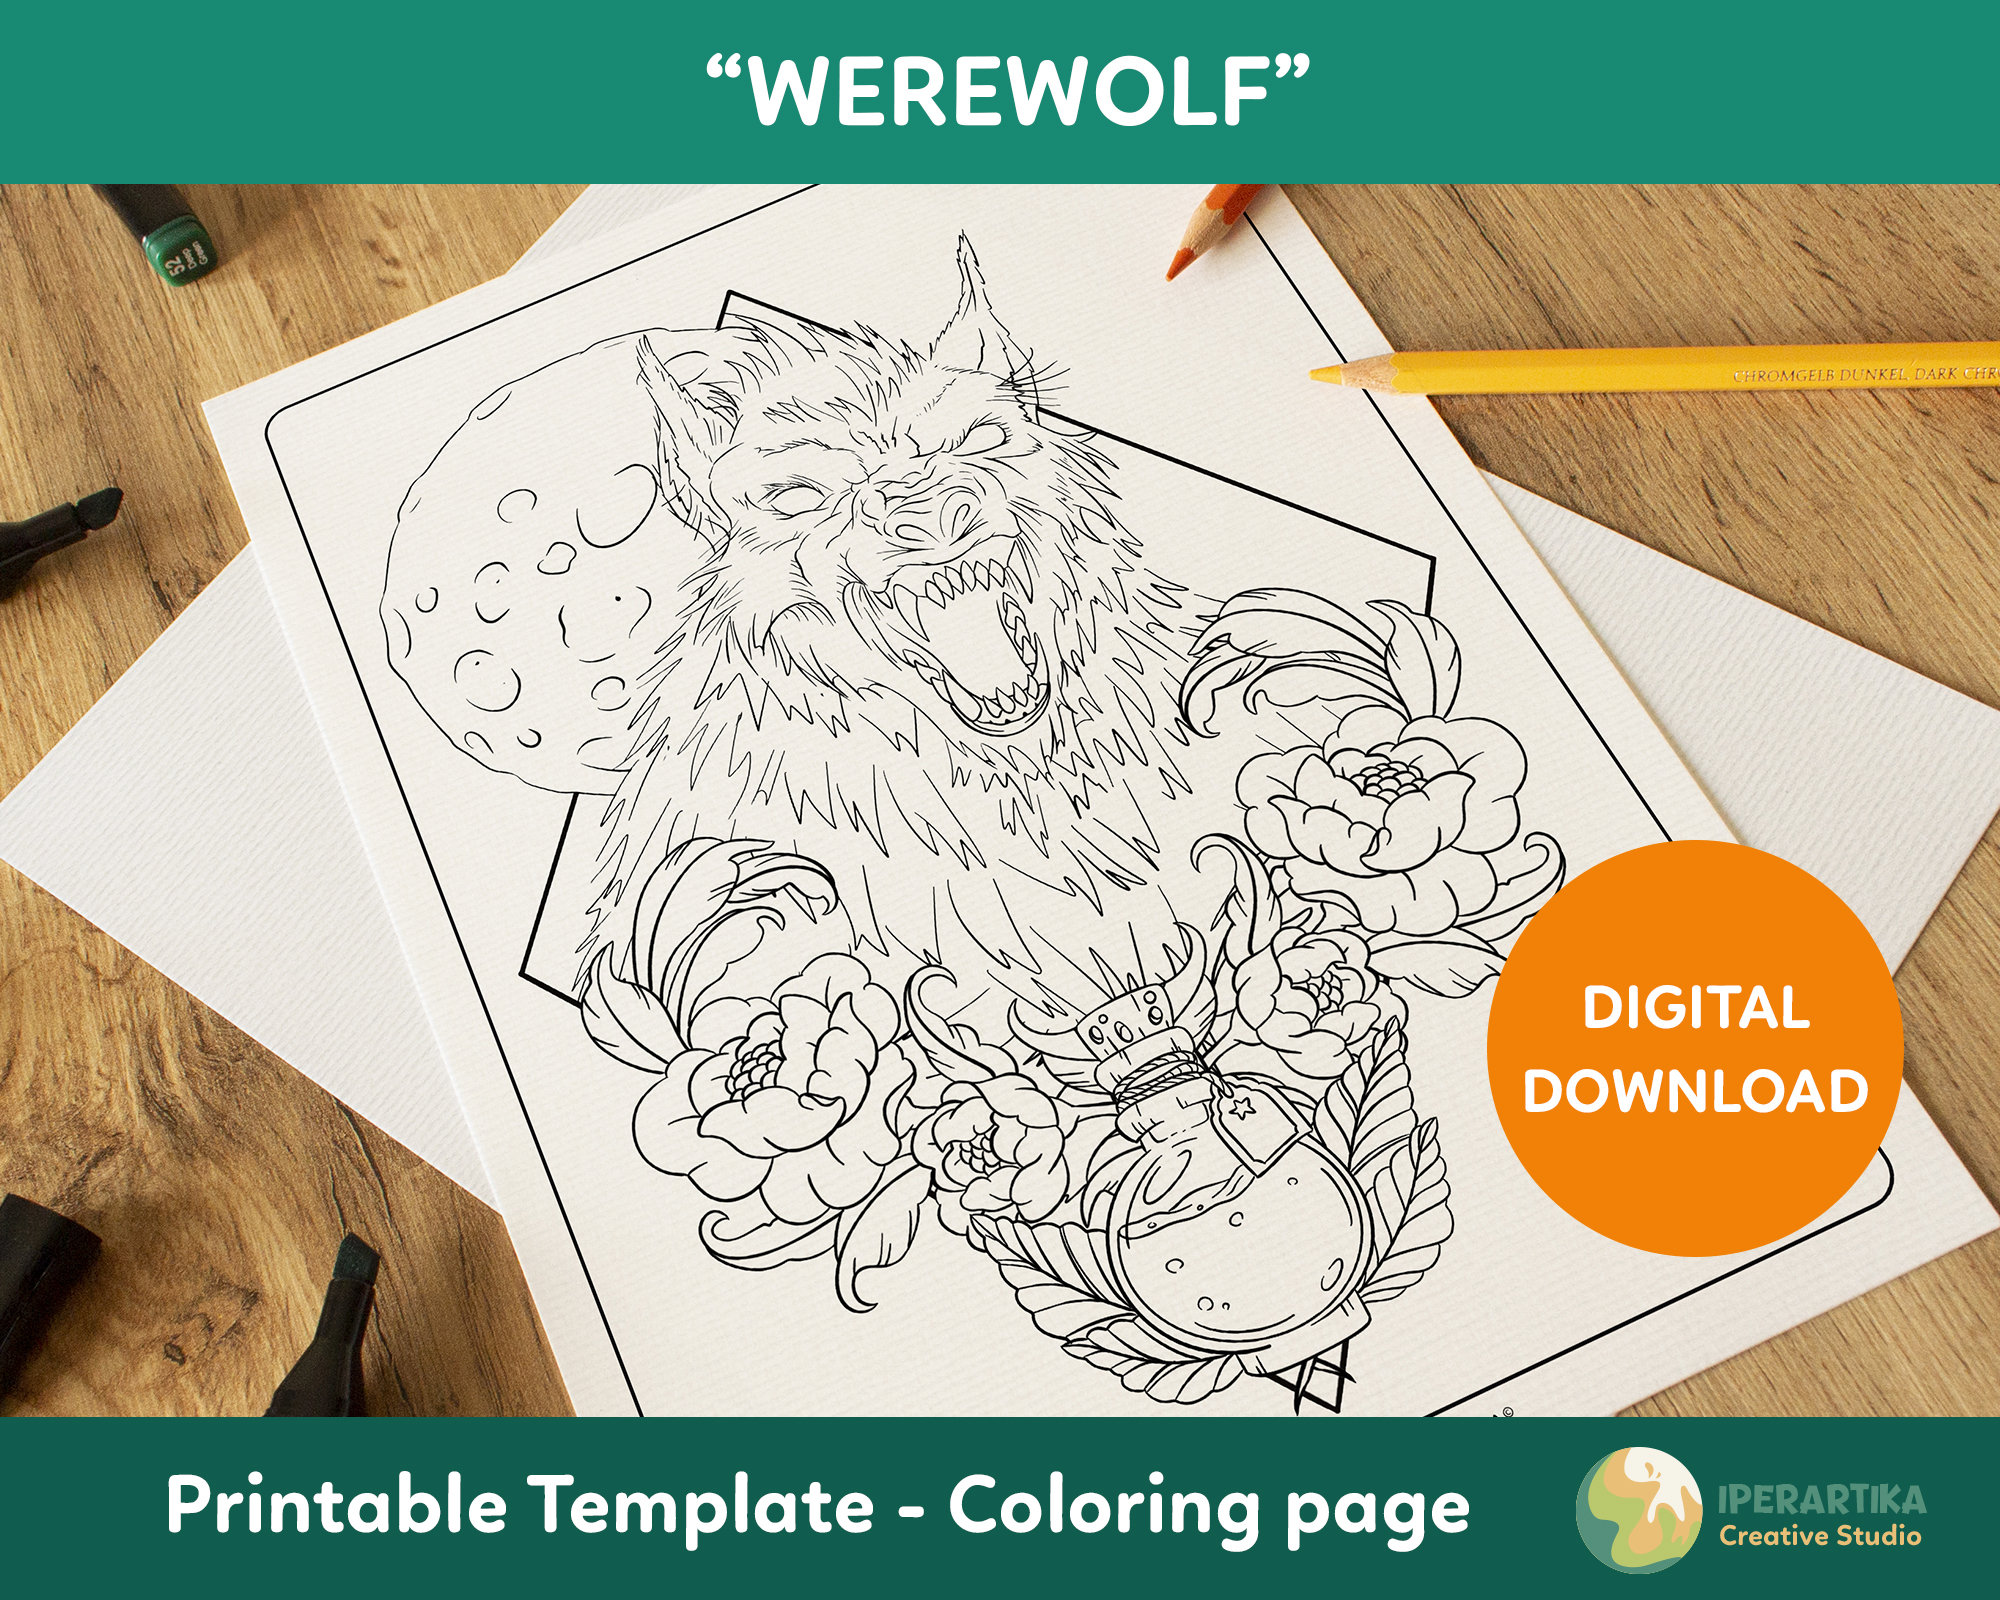 Werewolf coloring page printable halloween coloring pages coloring sheets digital download coloring for adults coloring page pdf